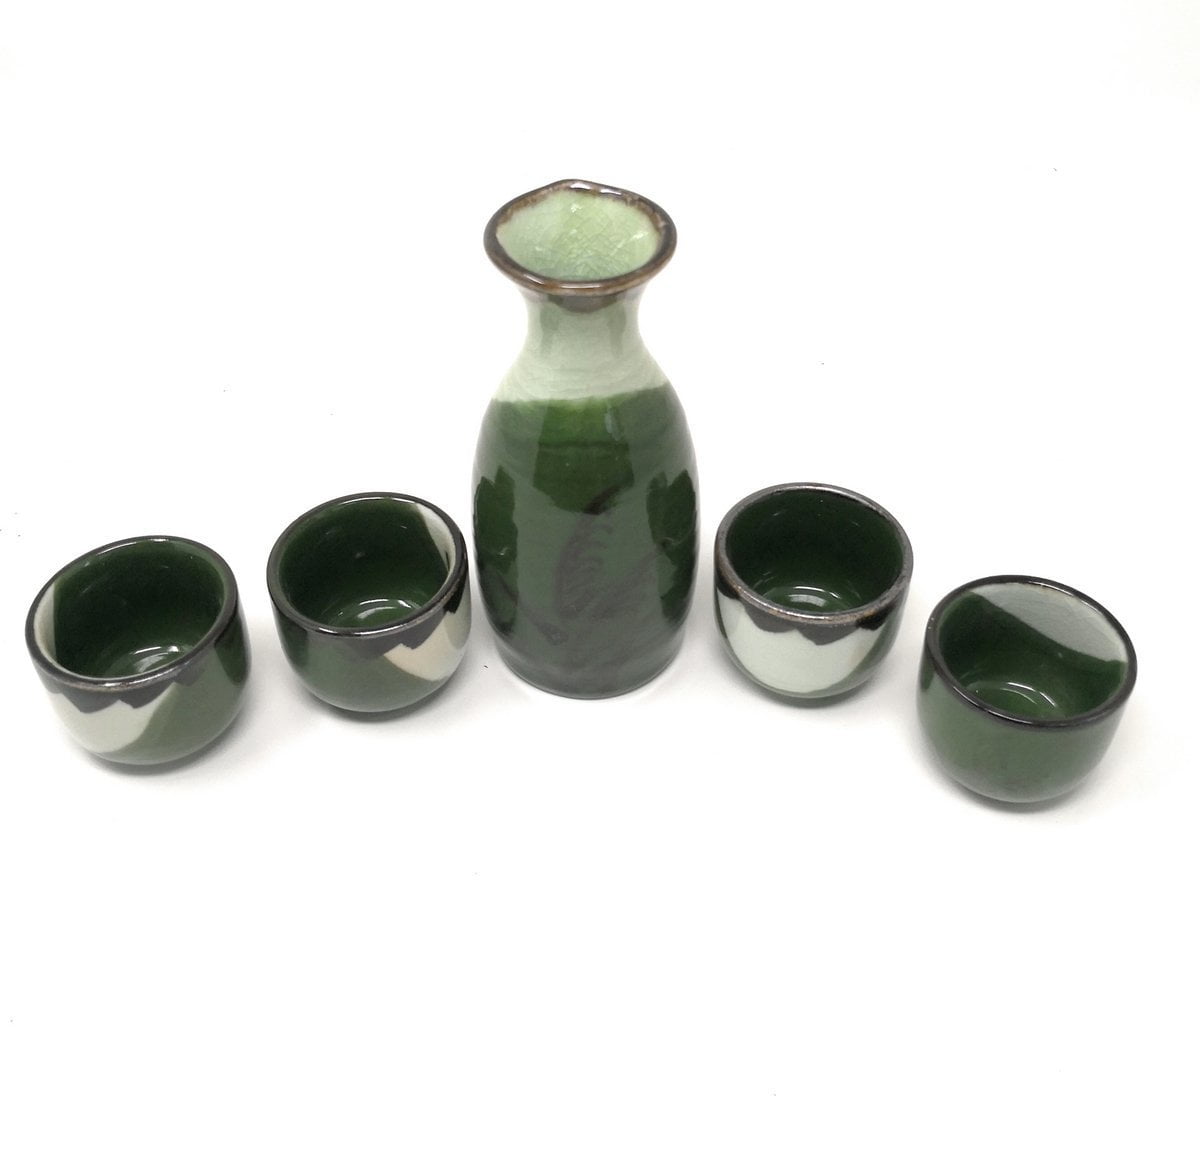 Japanese Asian Lucky Bamboo 12 fl oz Porcelain Sake Set Decanter with Four Cups Drinkware Gift Set 